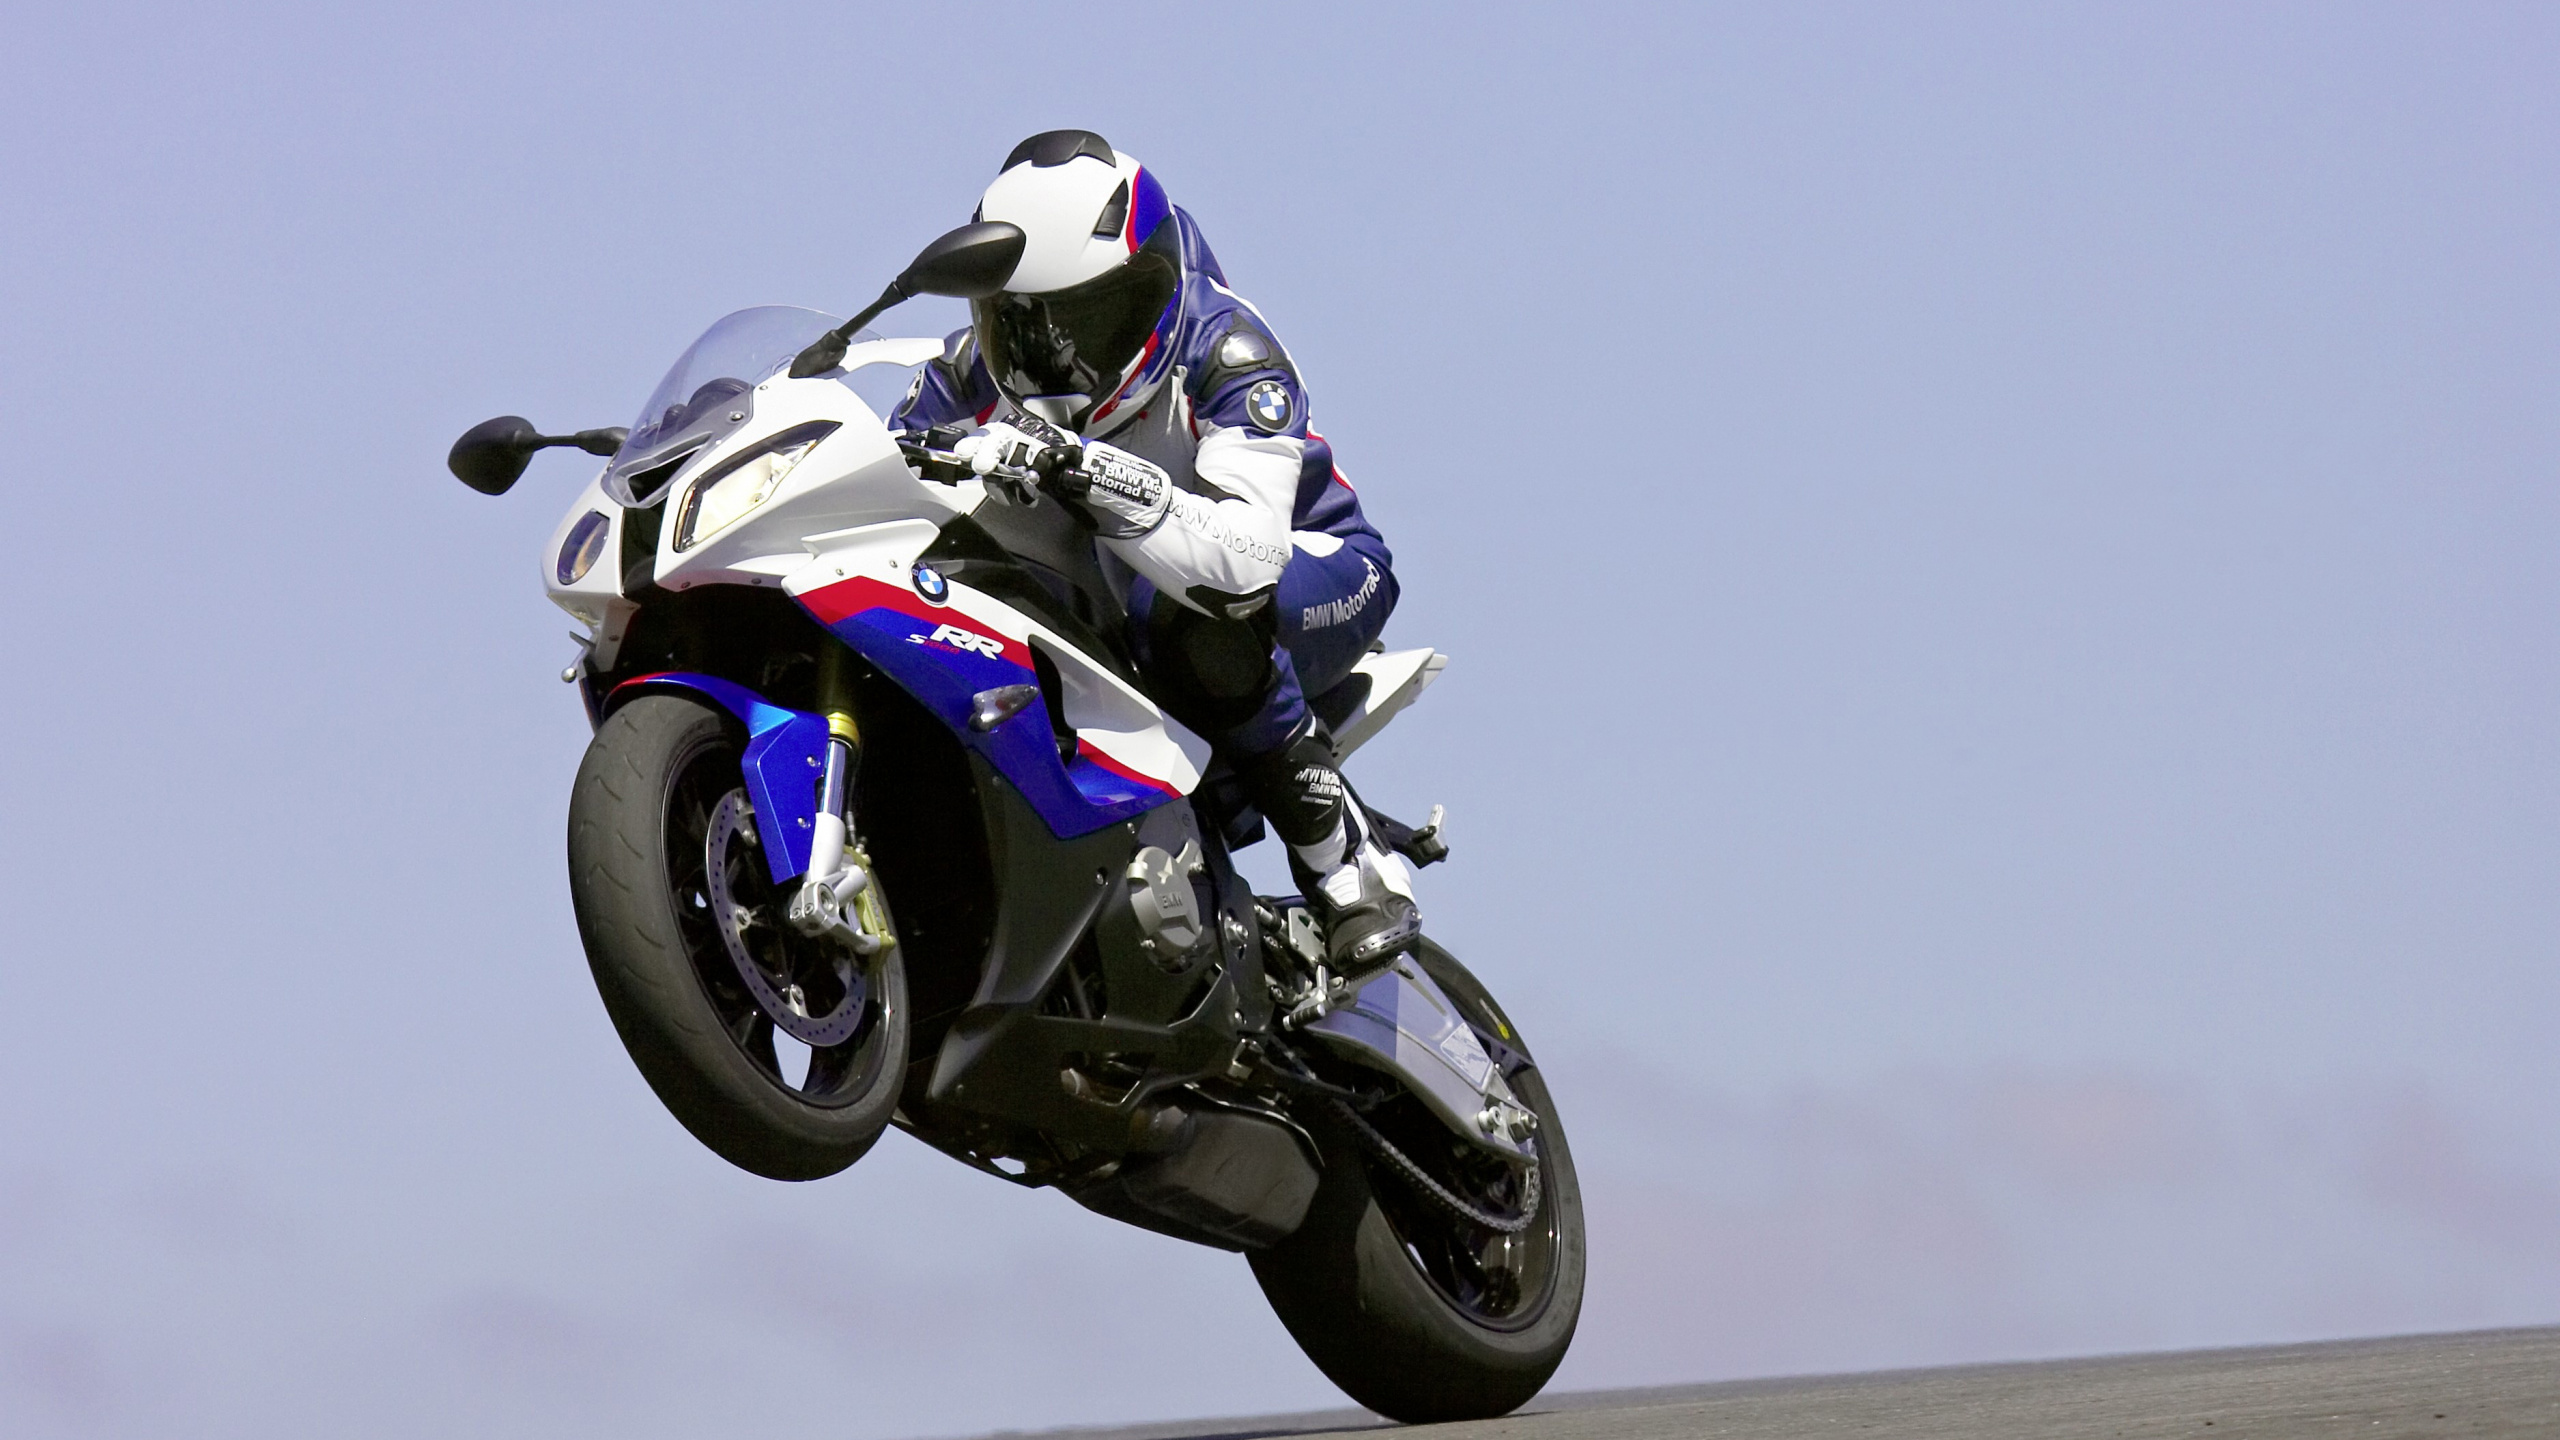 Man in White and Black Motorcycle Helmet Riding White and Black Sports Bike. Wallpaper in 2560x1440 Resolution